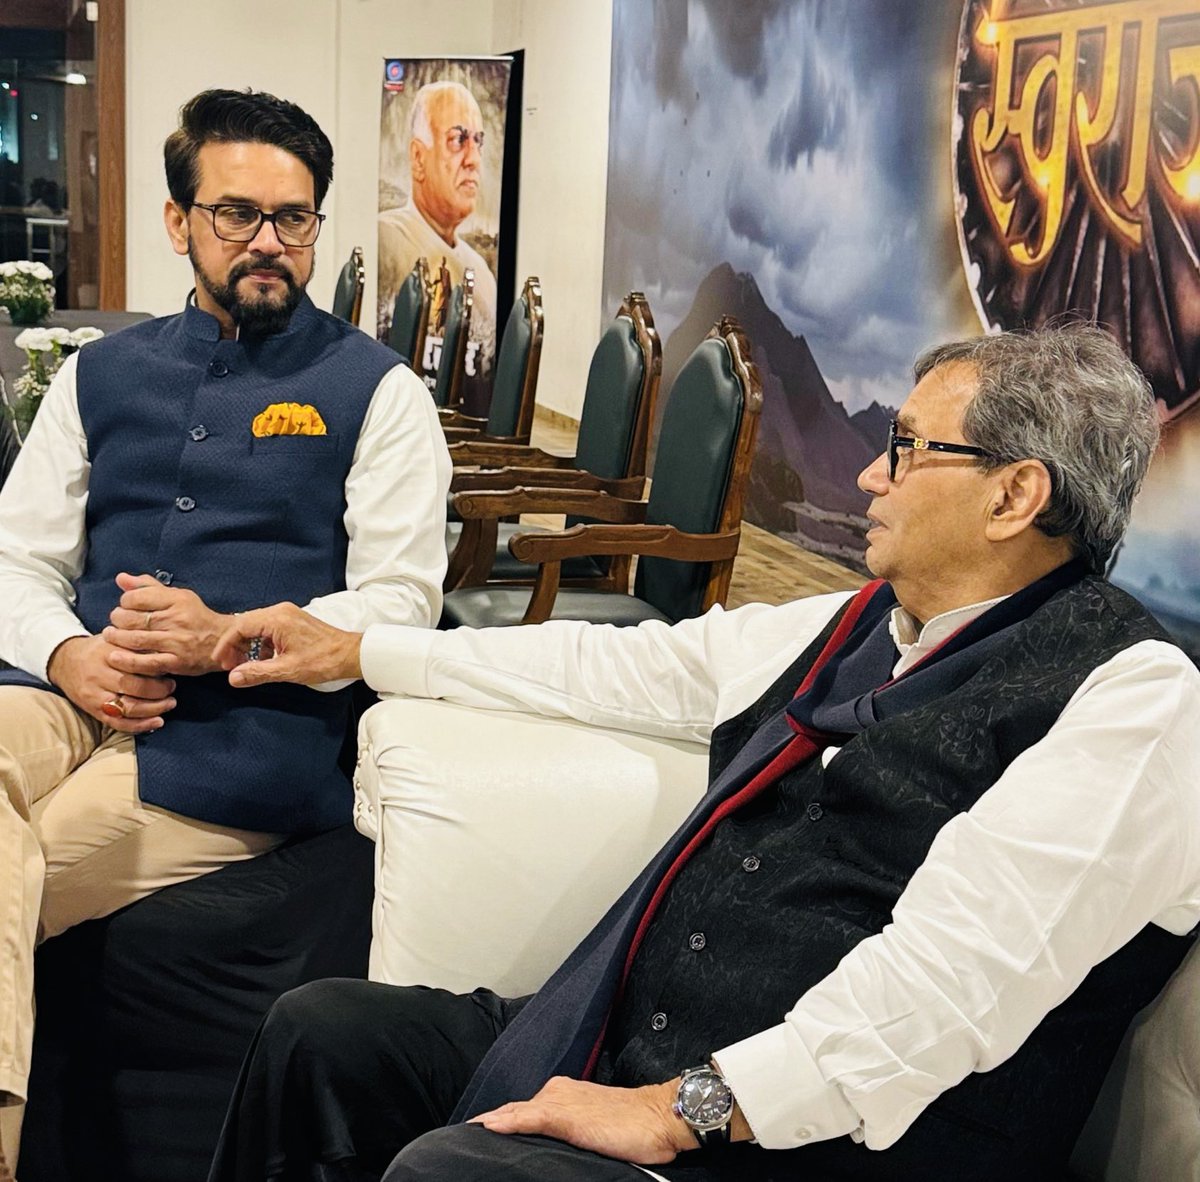 Heartiest congratulations sh #ANURAG THAKUR JI For launching two #DOORDARSHAN SHOWS ON OTT first time with #Amazon prime video today in mumbai. 1. #SWARAJ - 75 episodes 2. #SARDAR - a game changer - series on Sardar patel A great initiative by TEAM DD indeed 🙏🏽🙏🏽